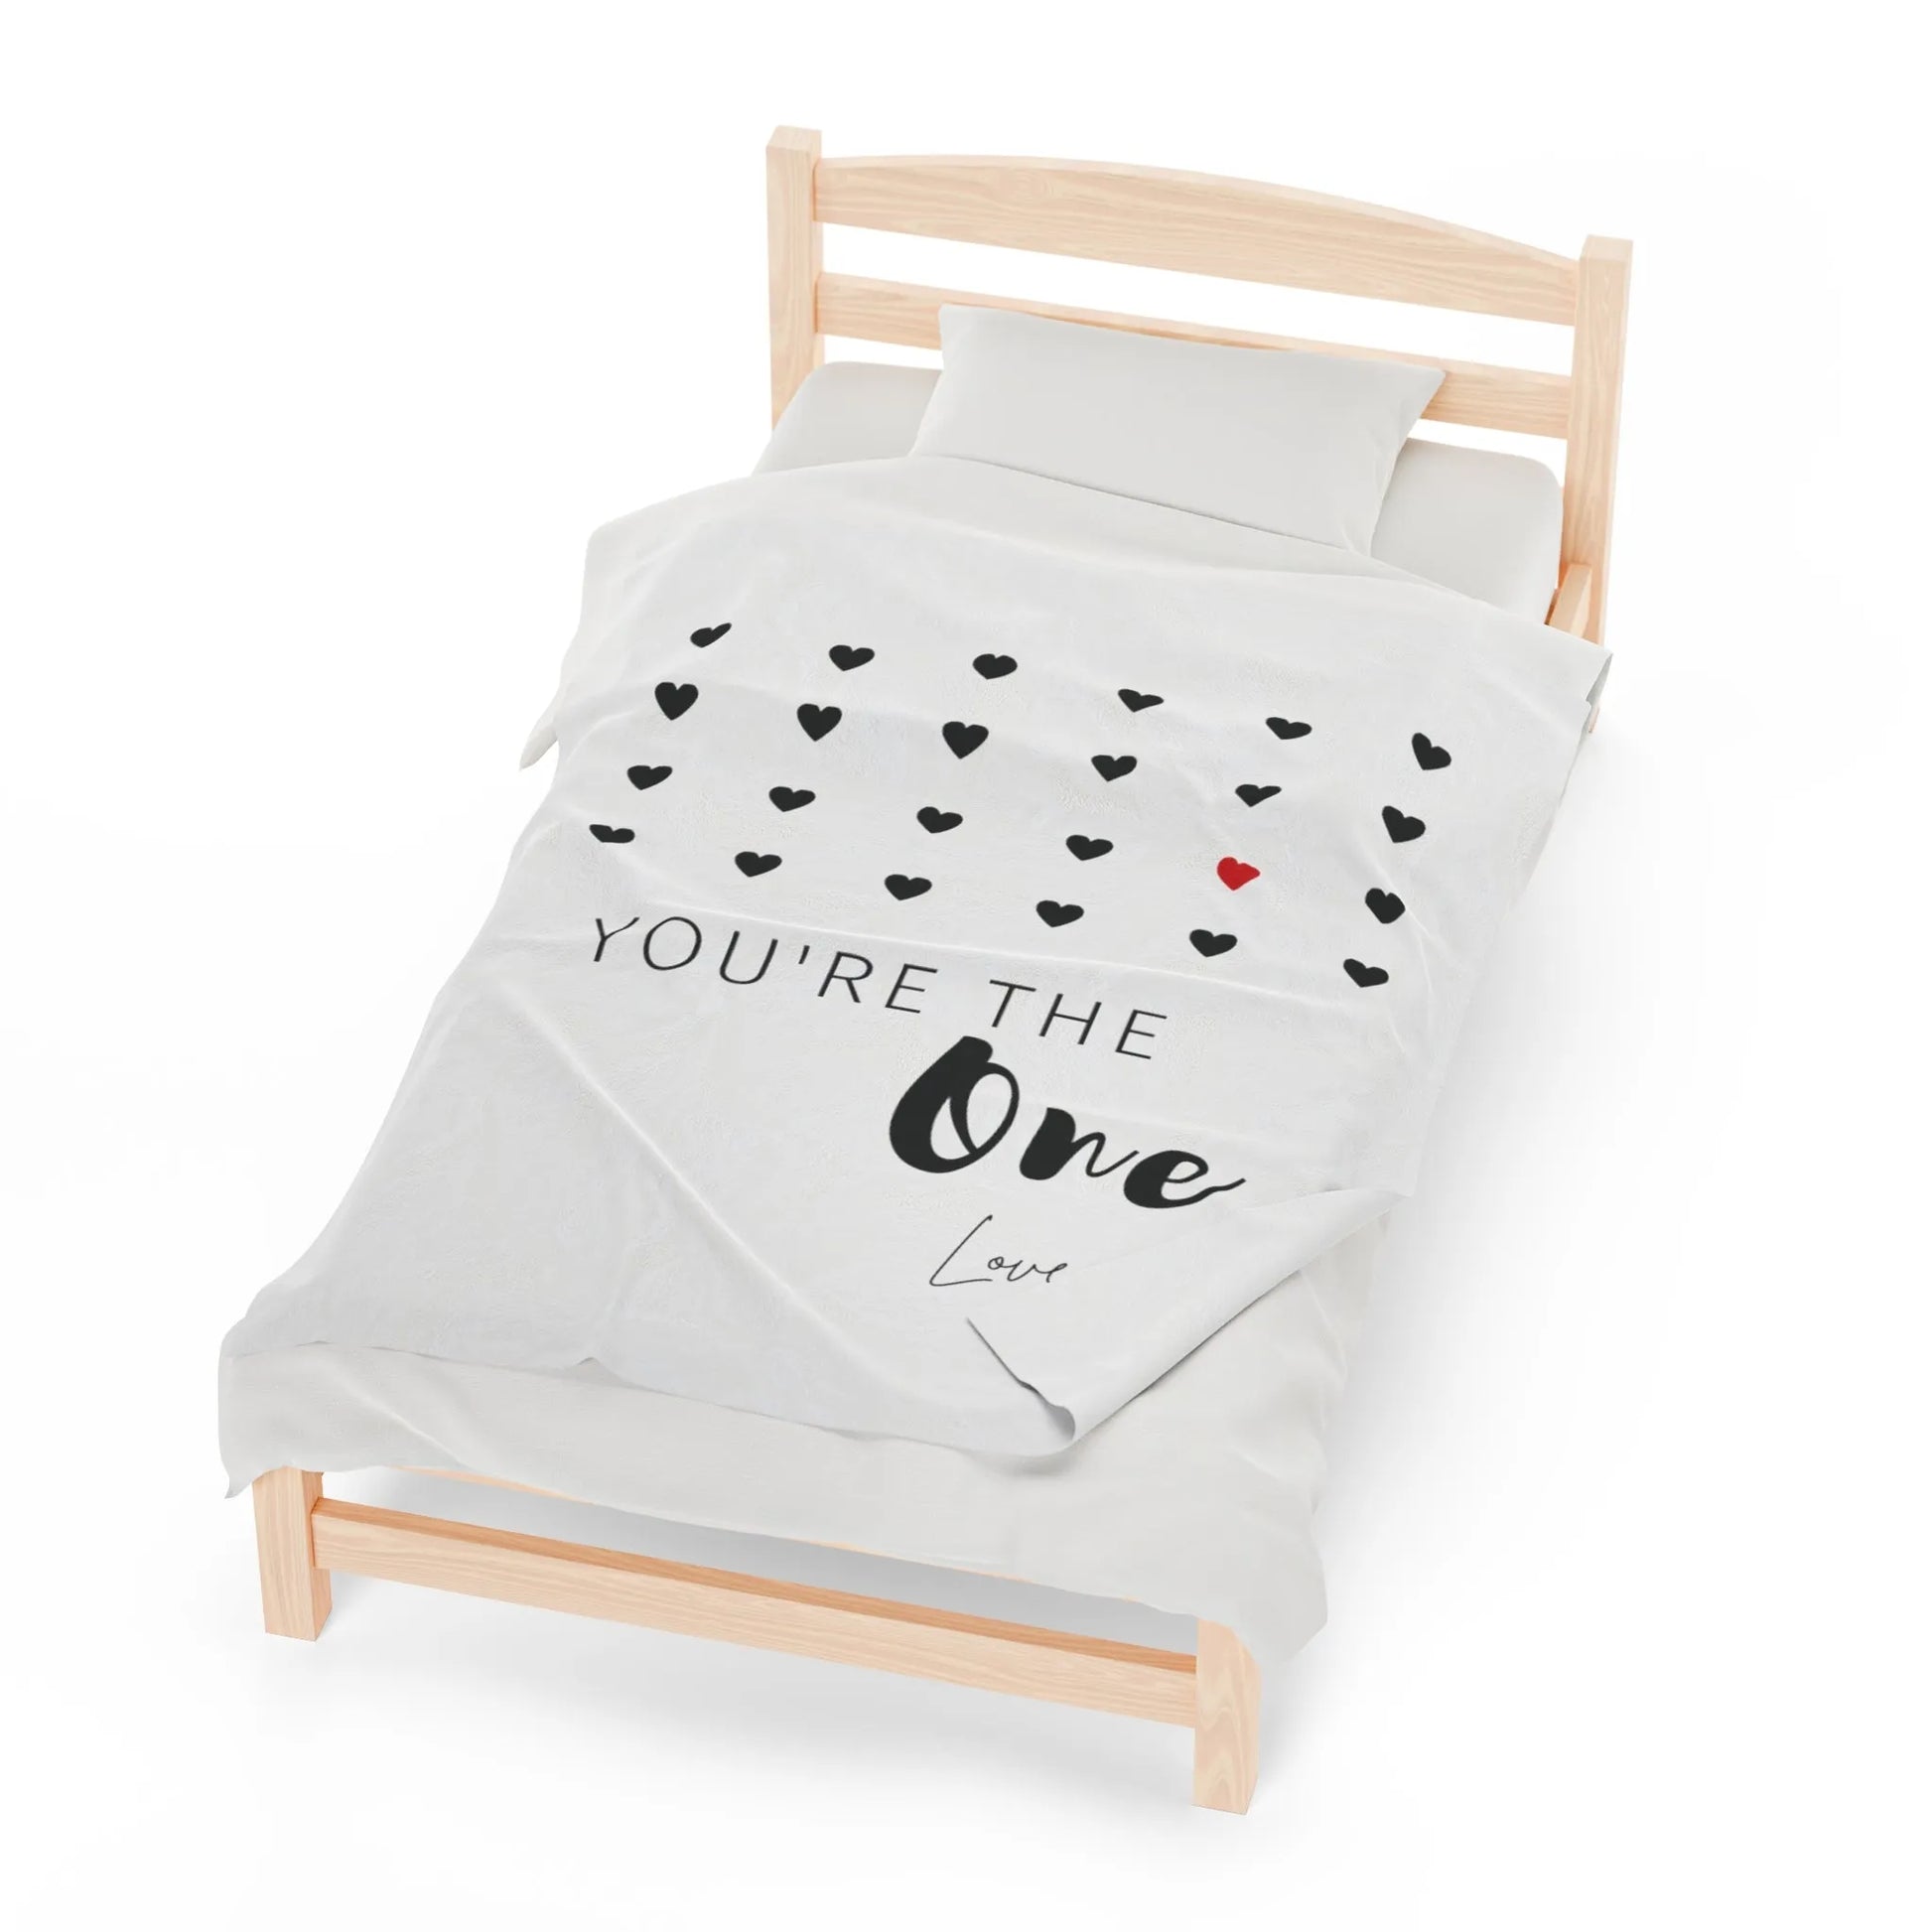 You're the one valentine's blanket